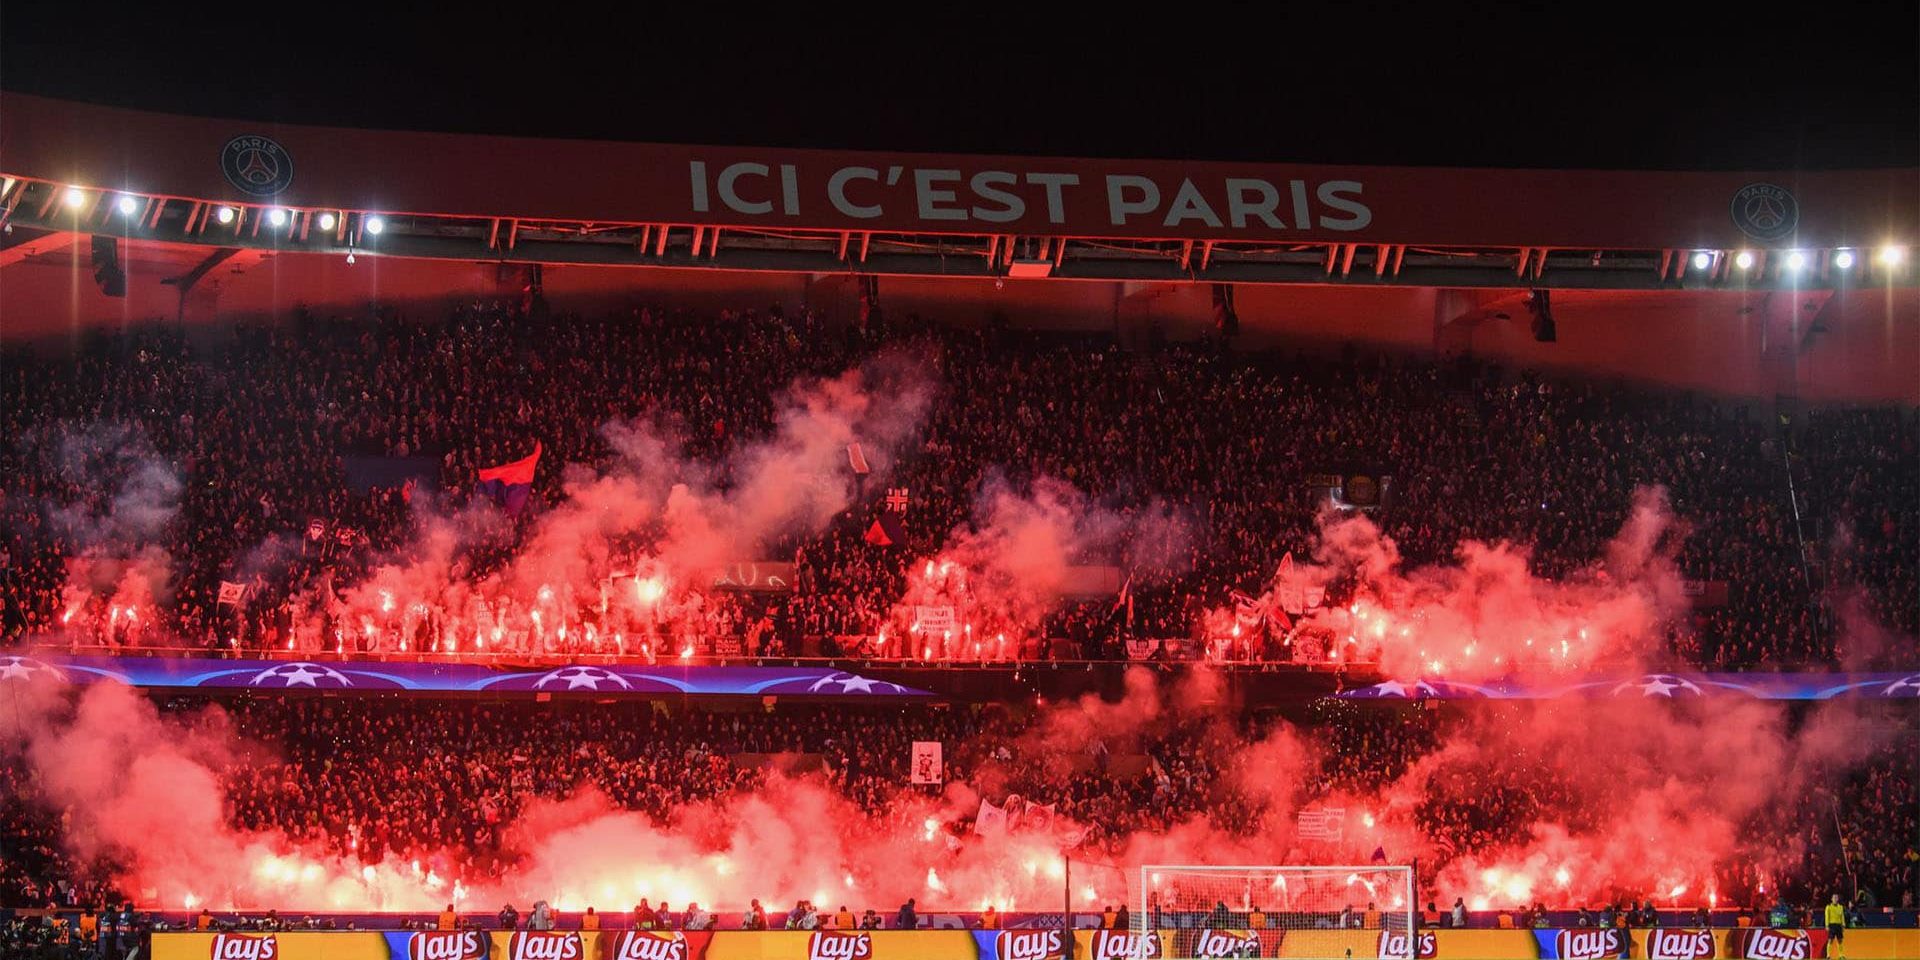 What Is The Biggest Rivalry In French Football